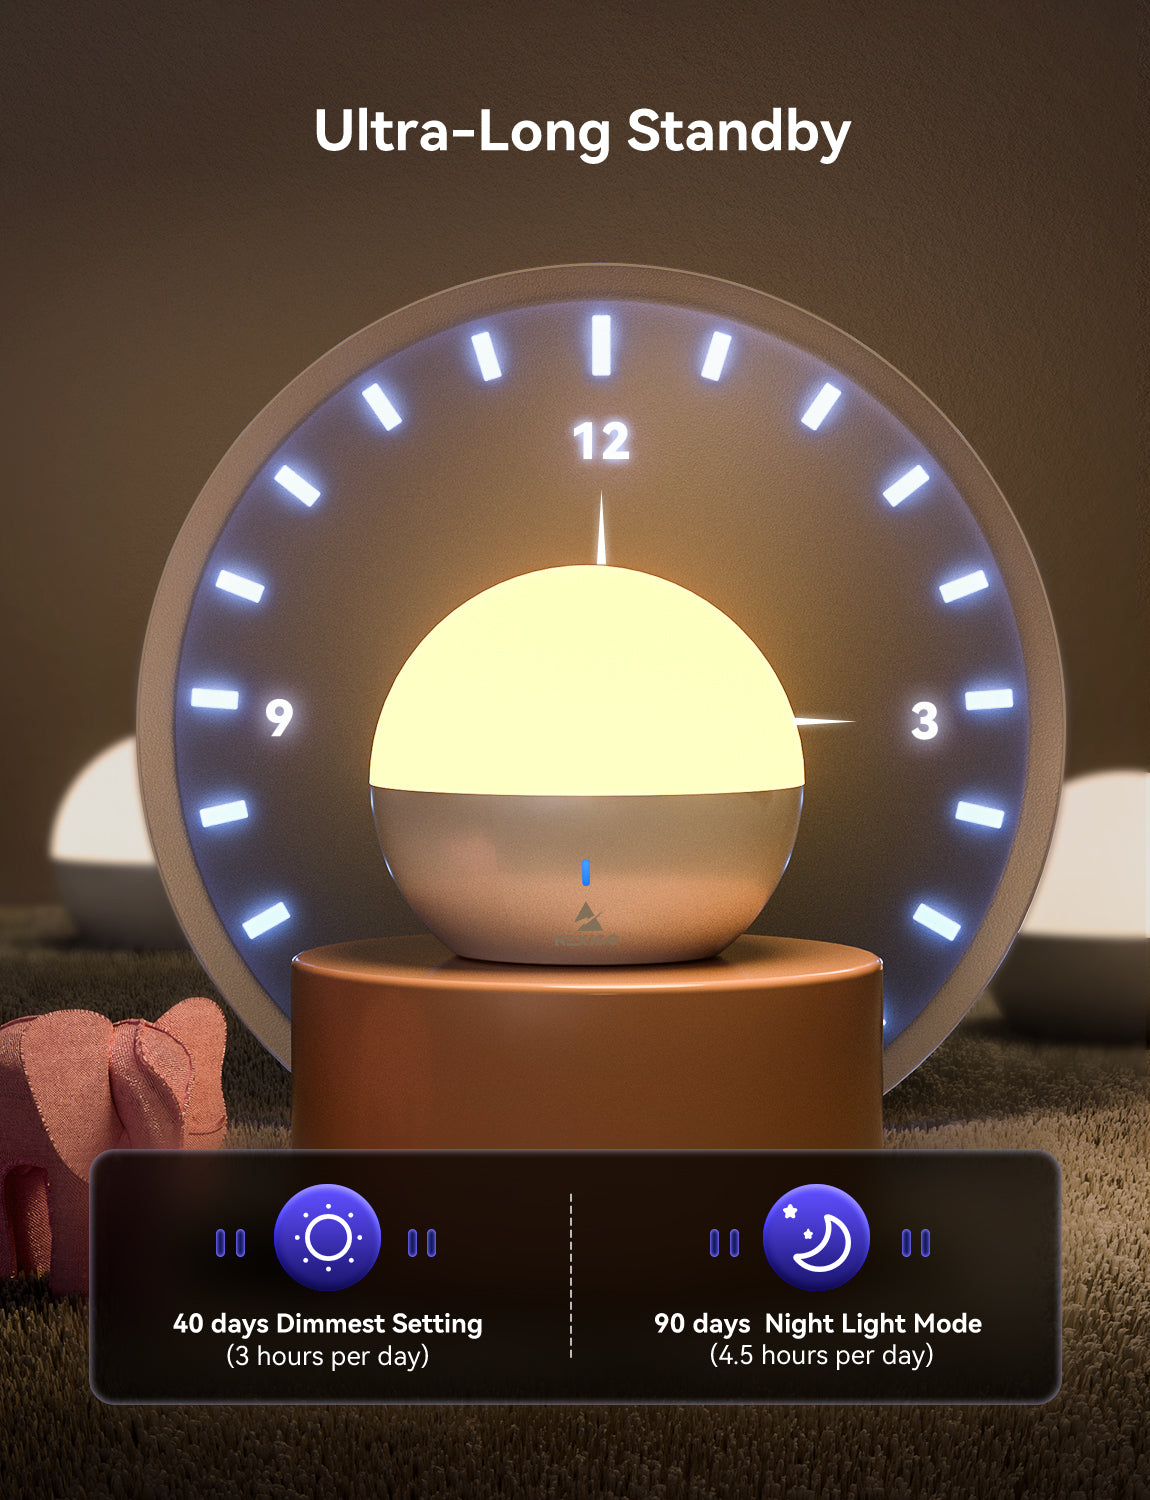 Long-lasting night light, 90 days standby in Night Light Mode (4.5 hours per day).